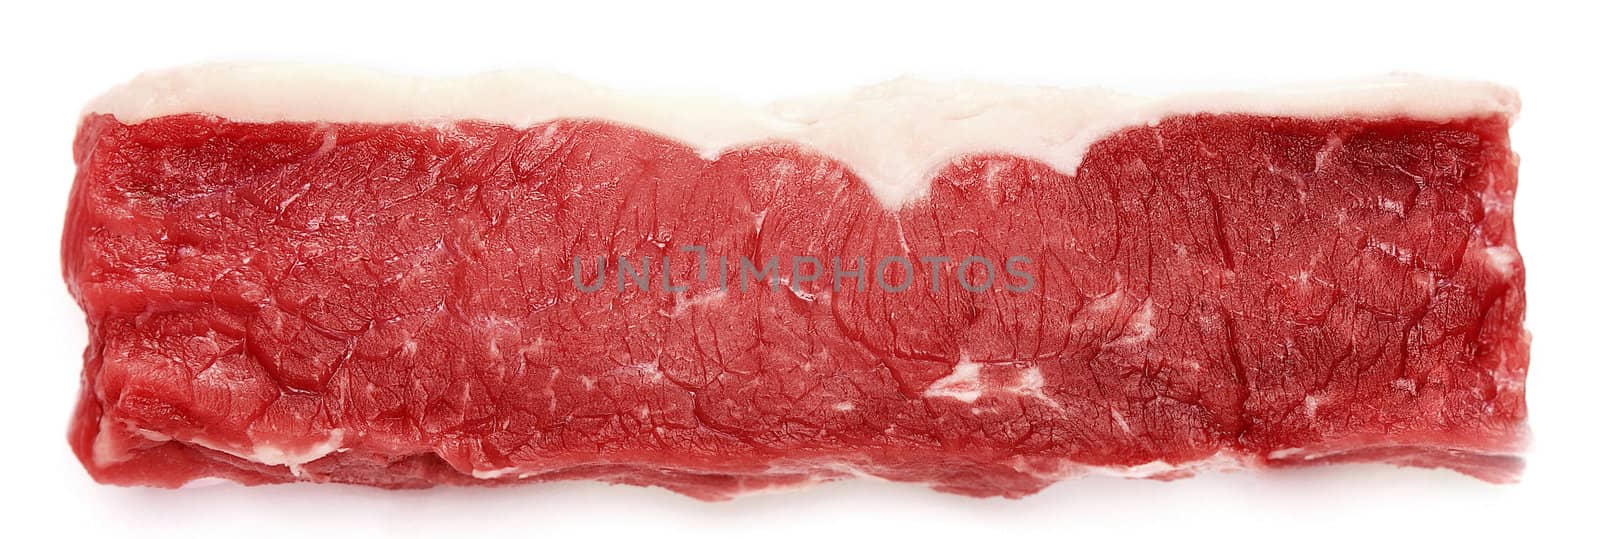 Piece of a beef, on white by ozaiachin